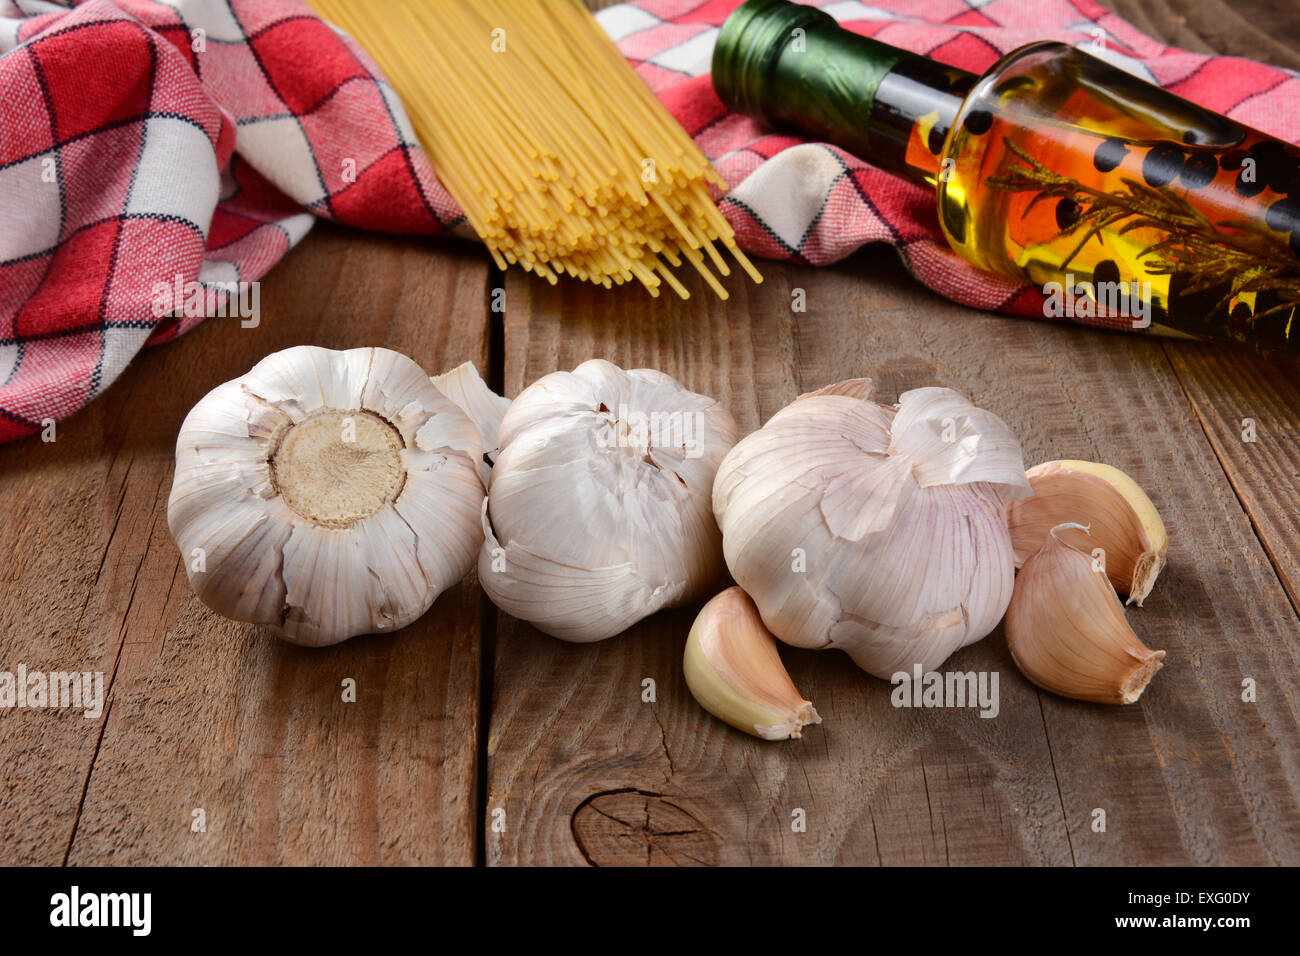 Italian cooking still life on a rustic wood table. Garlic cloves in the foreground with olive oil dried spaghetti and red and wh Stock Photo